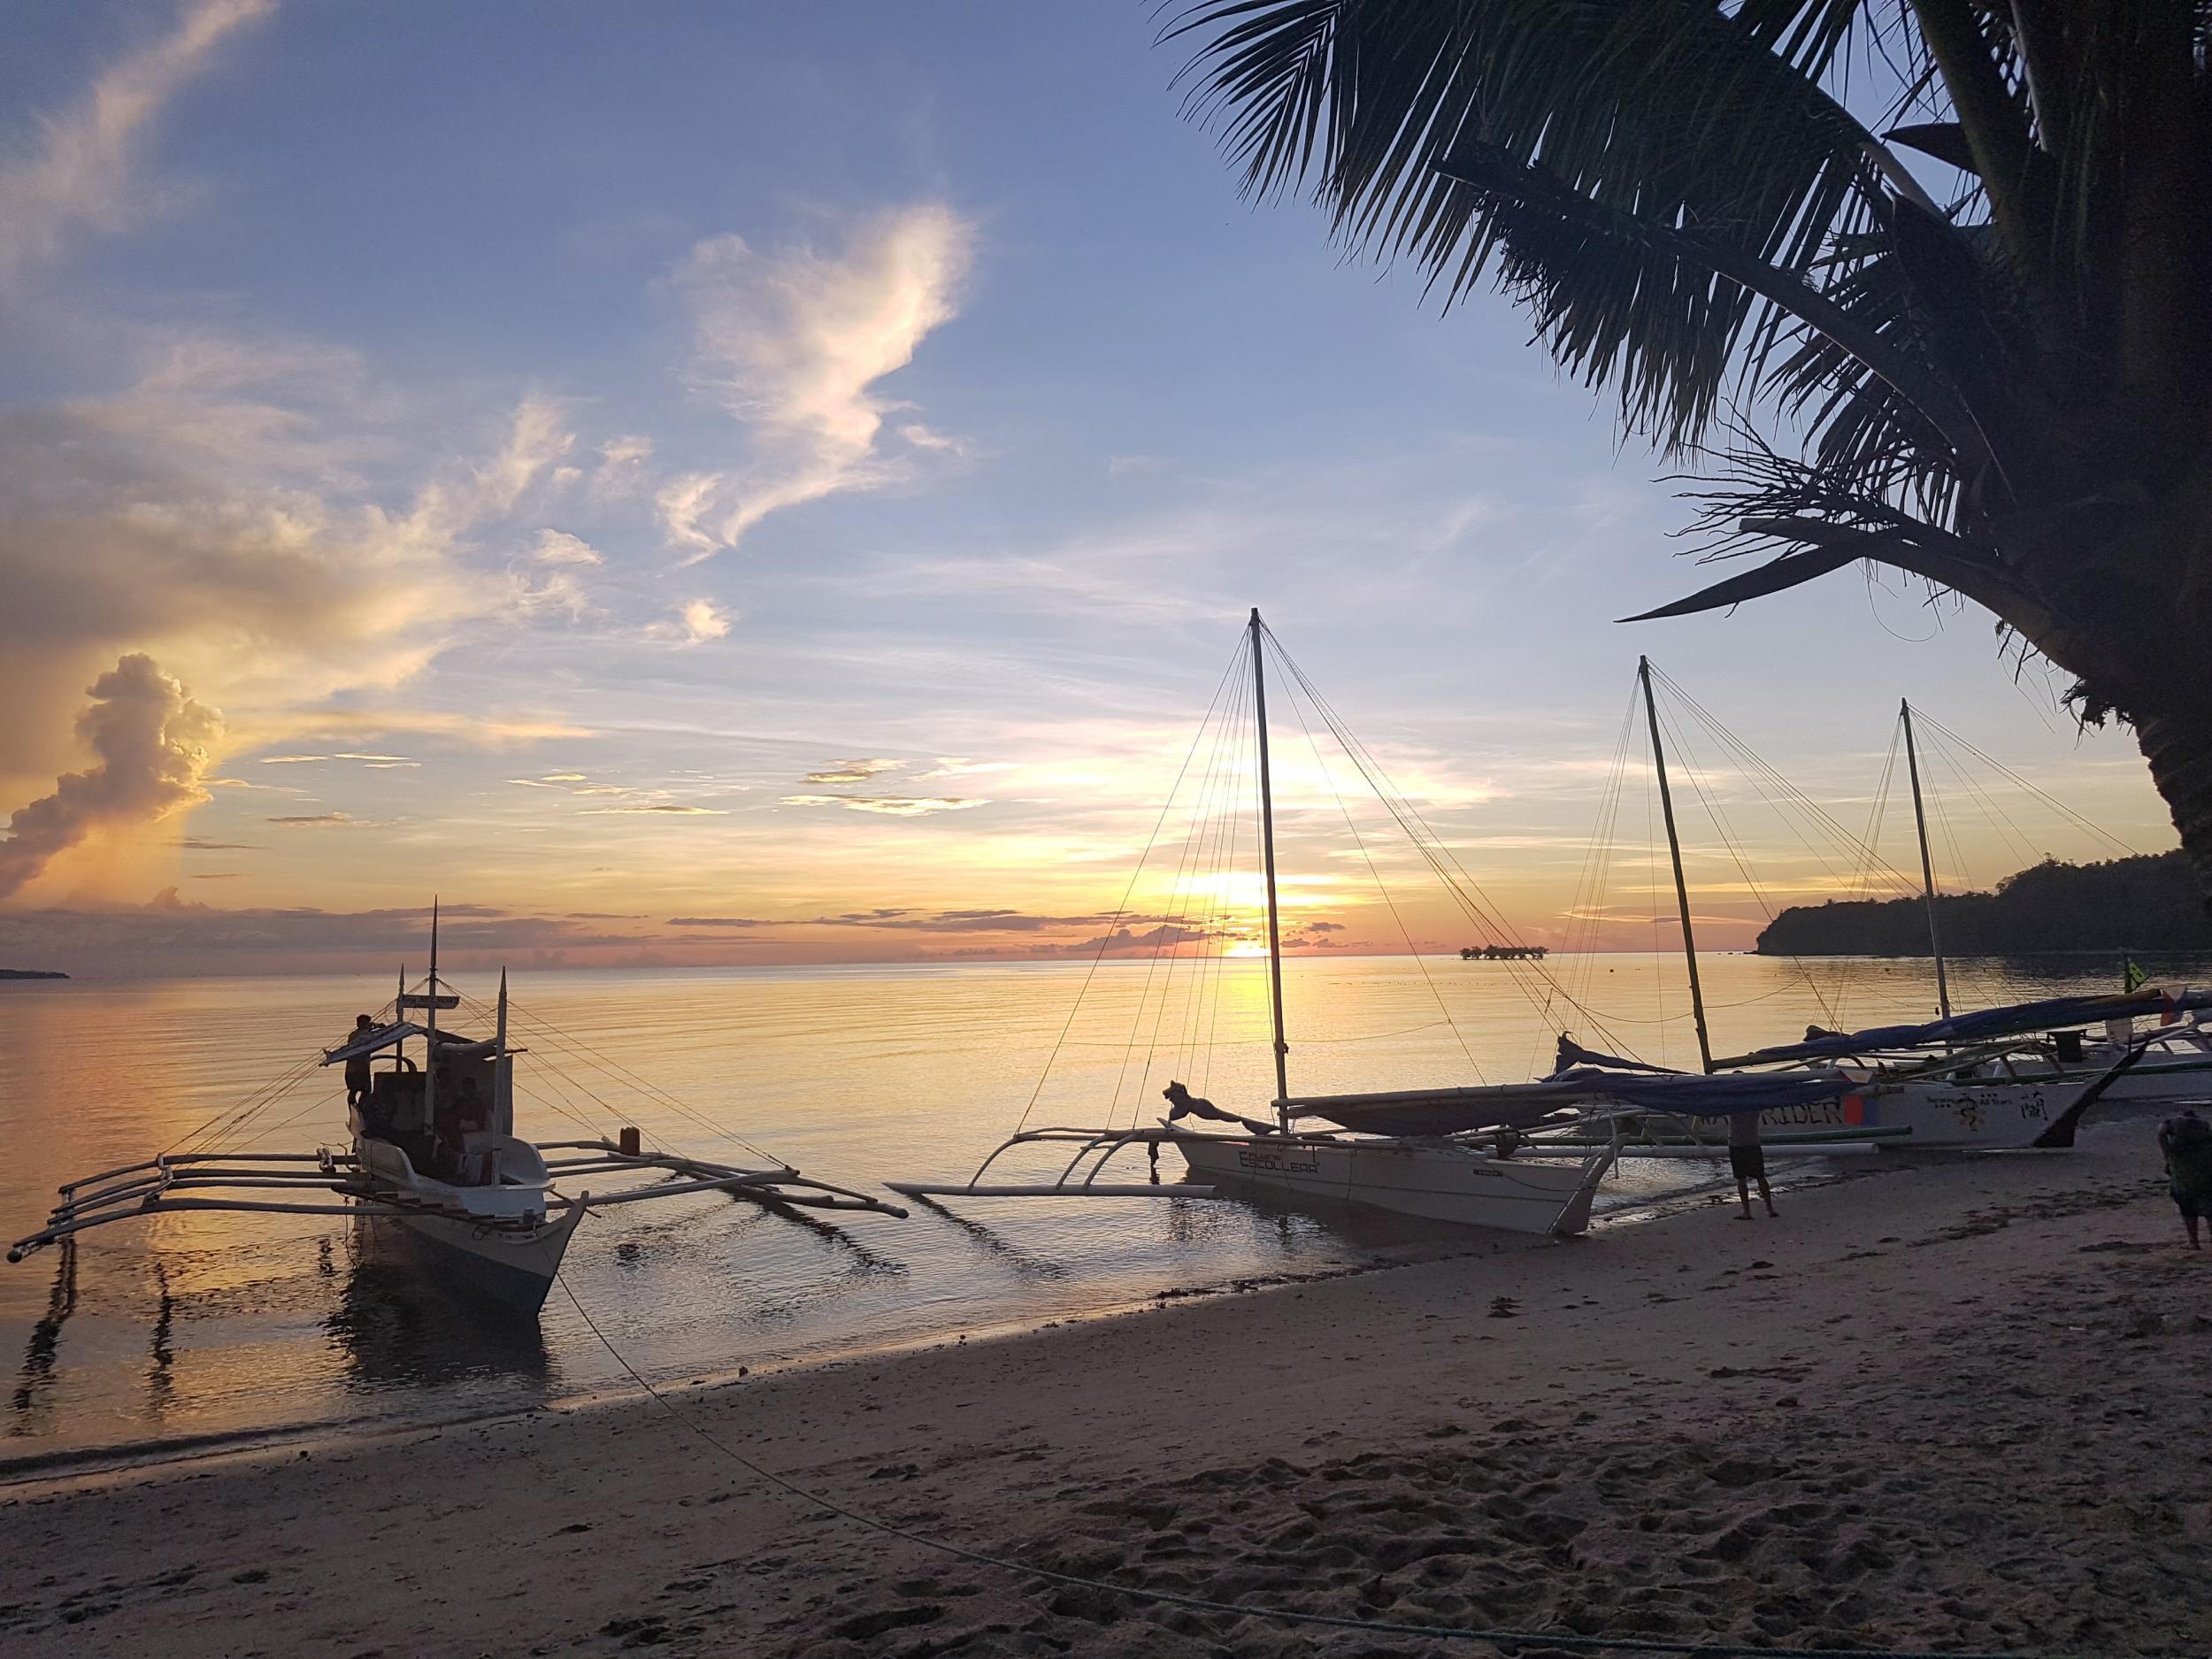 Locals use traditional paraw boats to get around from island to island